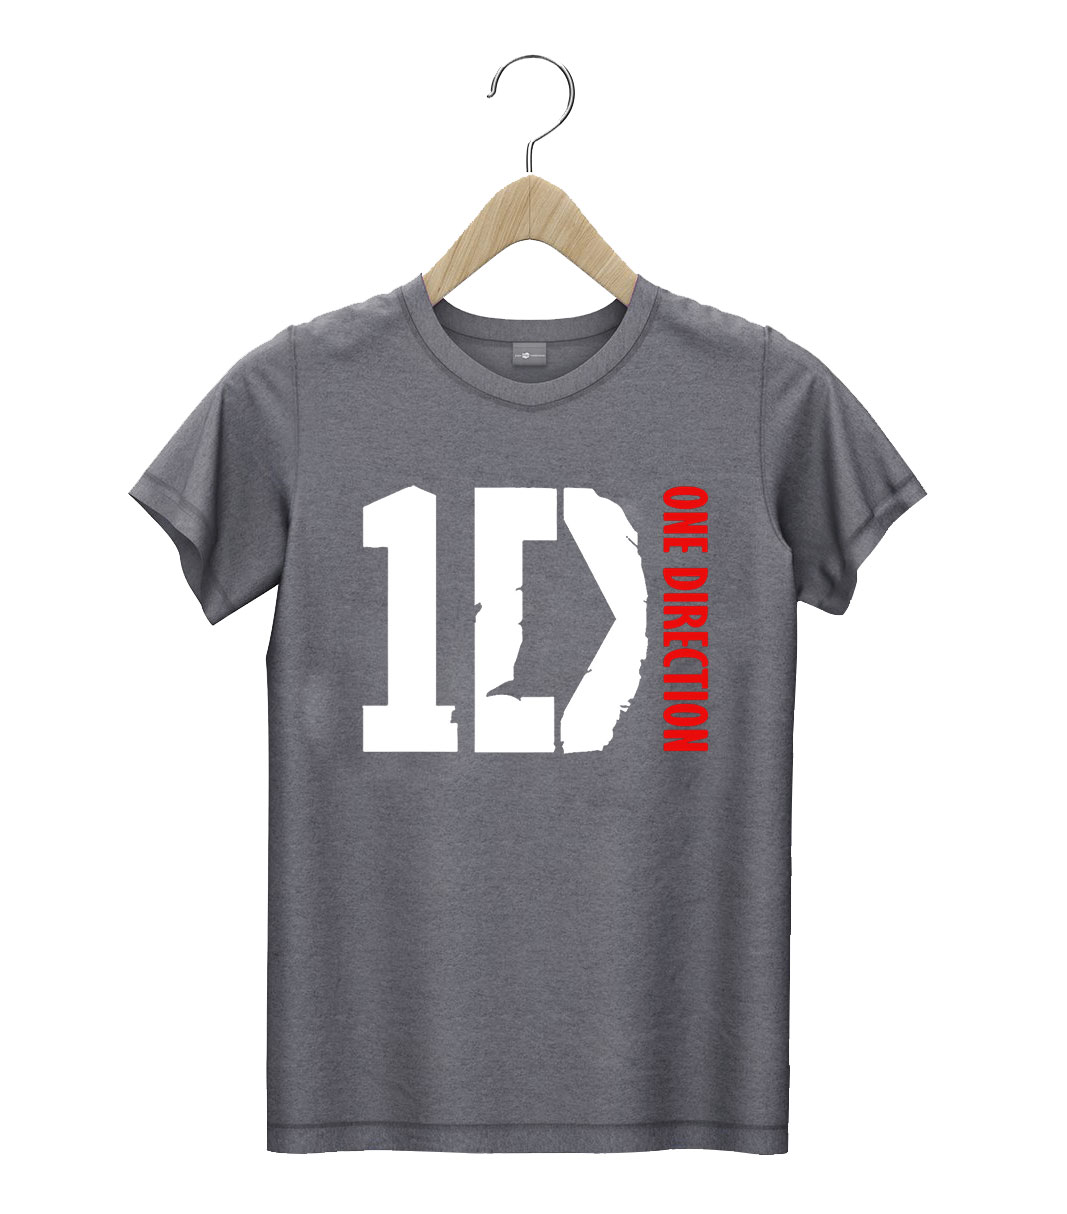 1d one direction band shirt